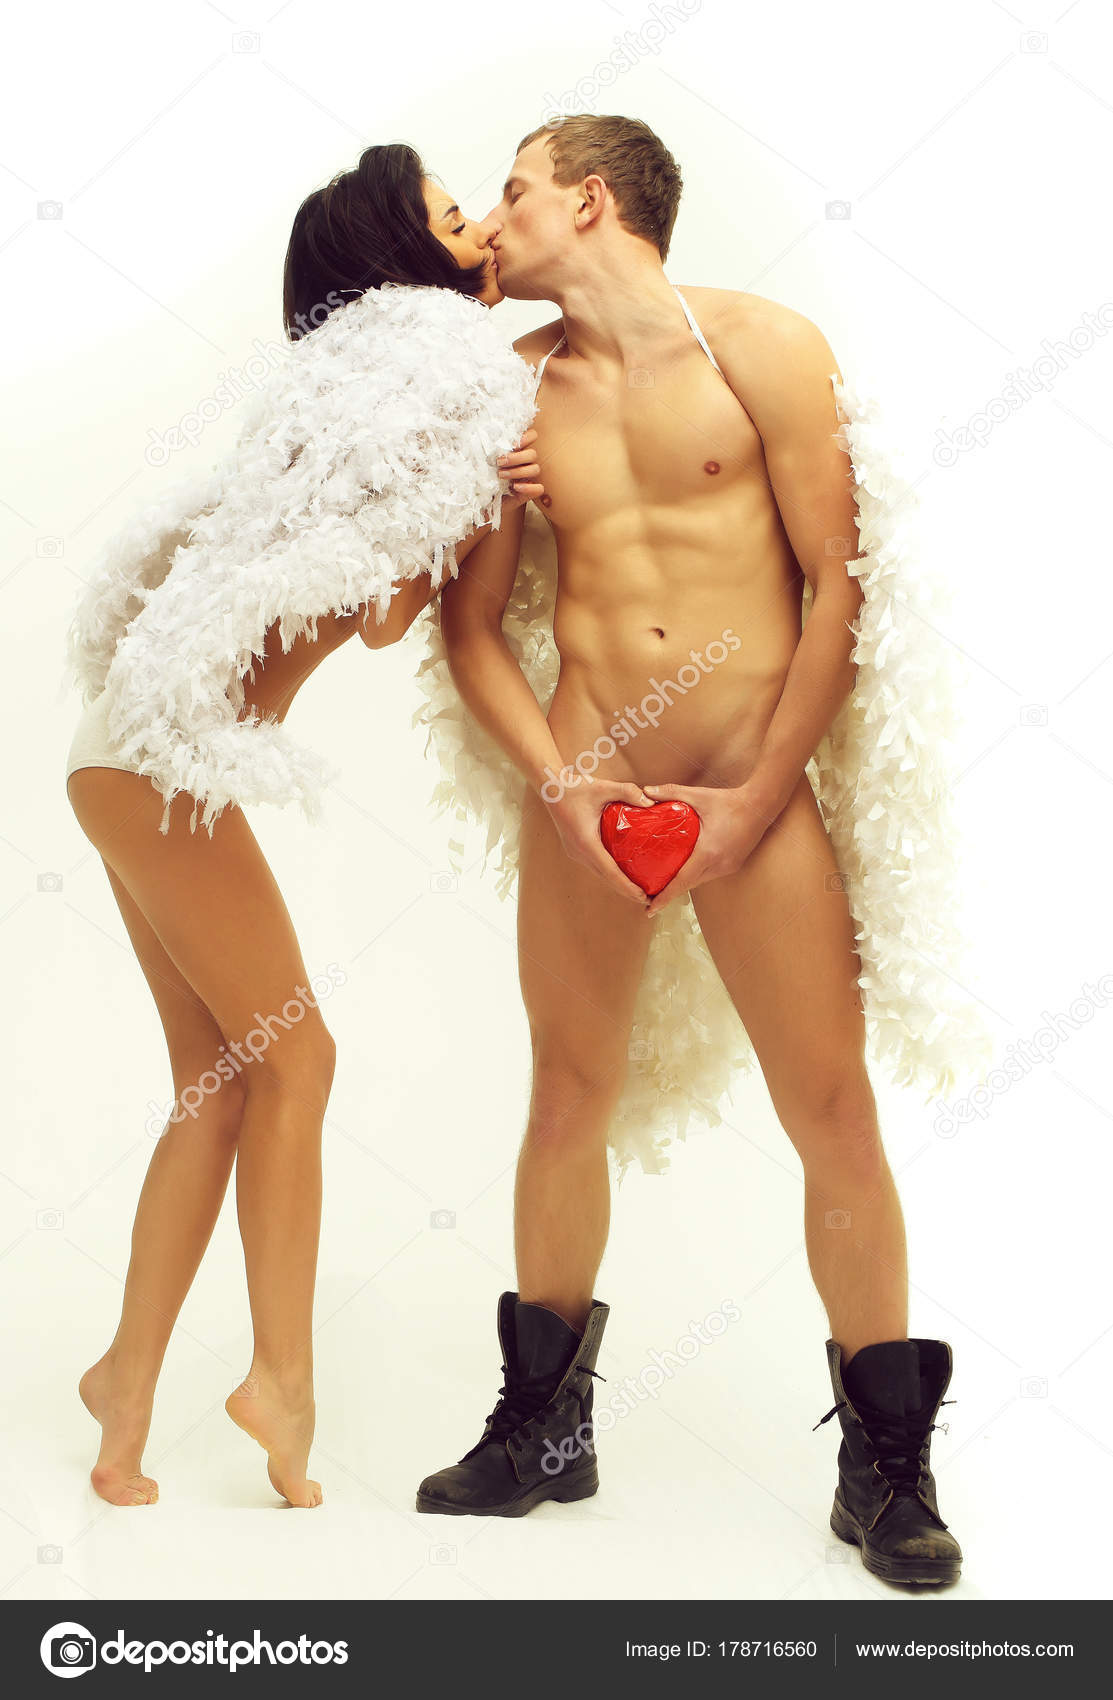 depositphotos_178716560-stock-photo-sexy-naked-angels-couple-with.jpg